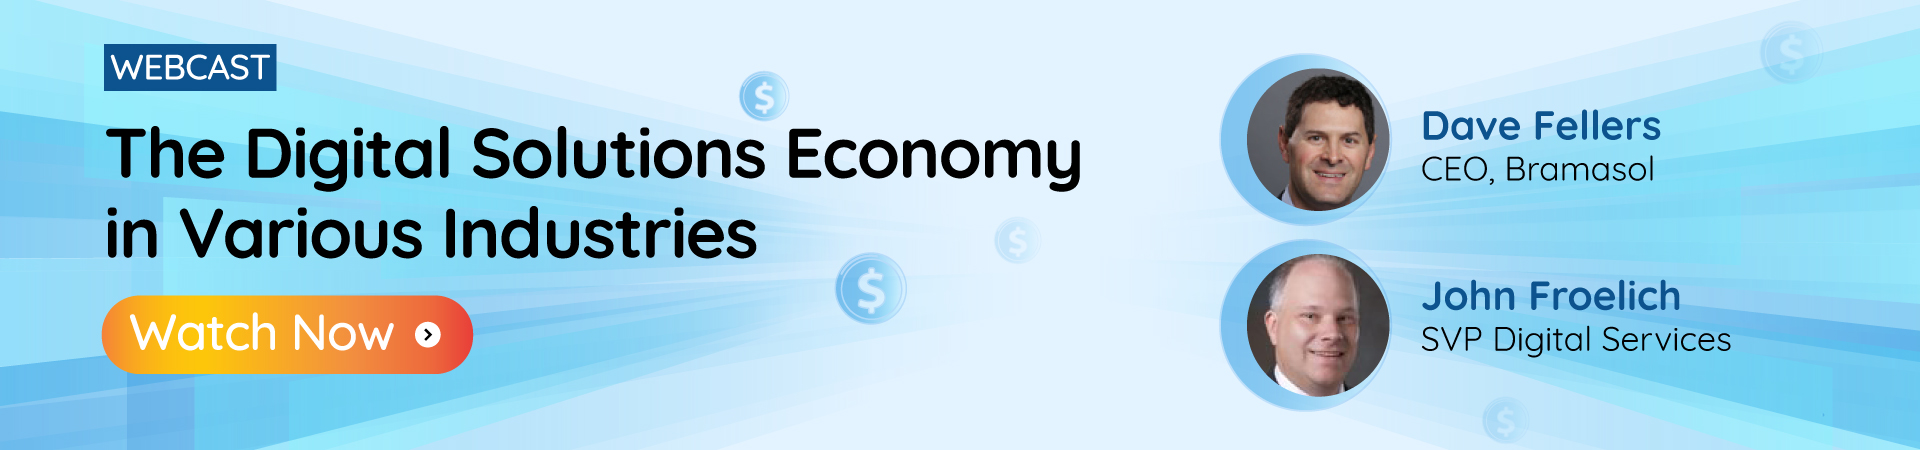 Webcast - The Digital Solutions Economy Banner